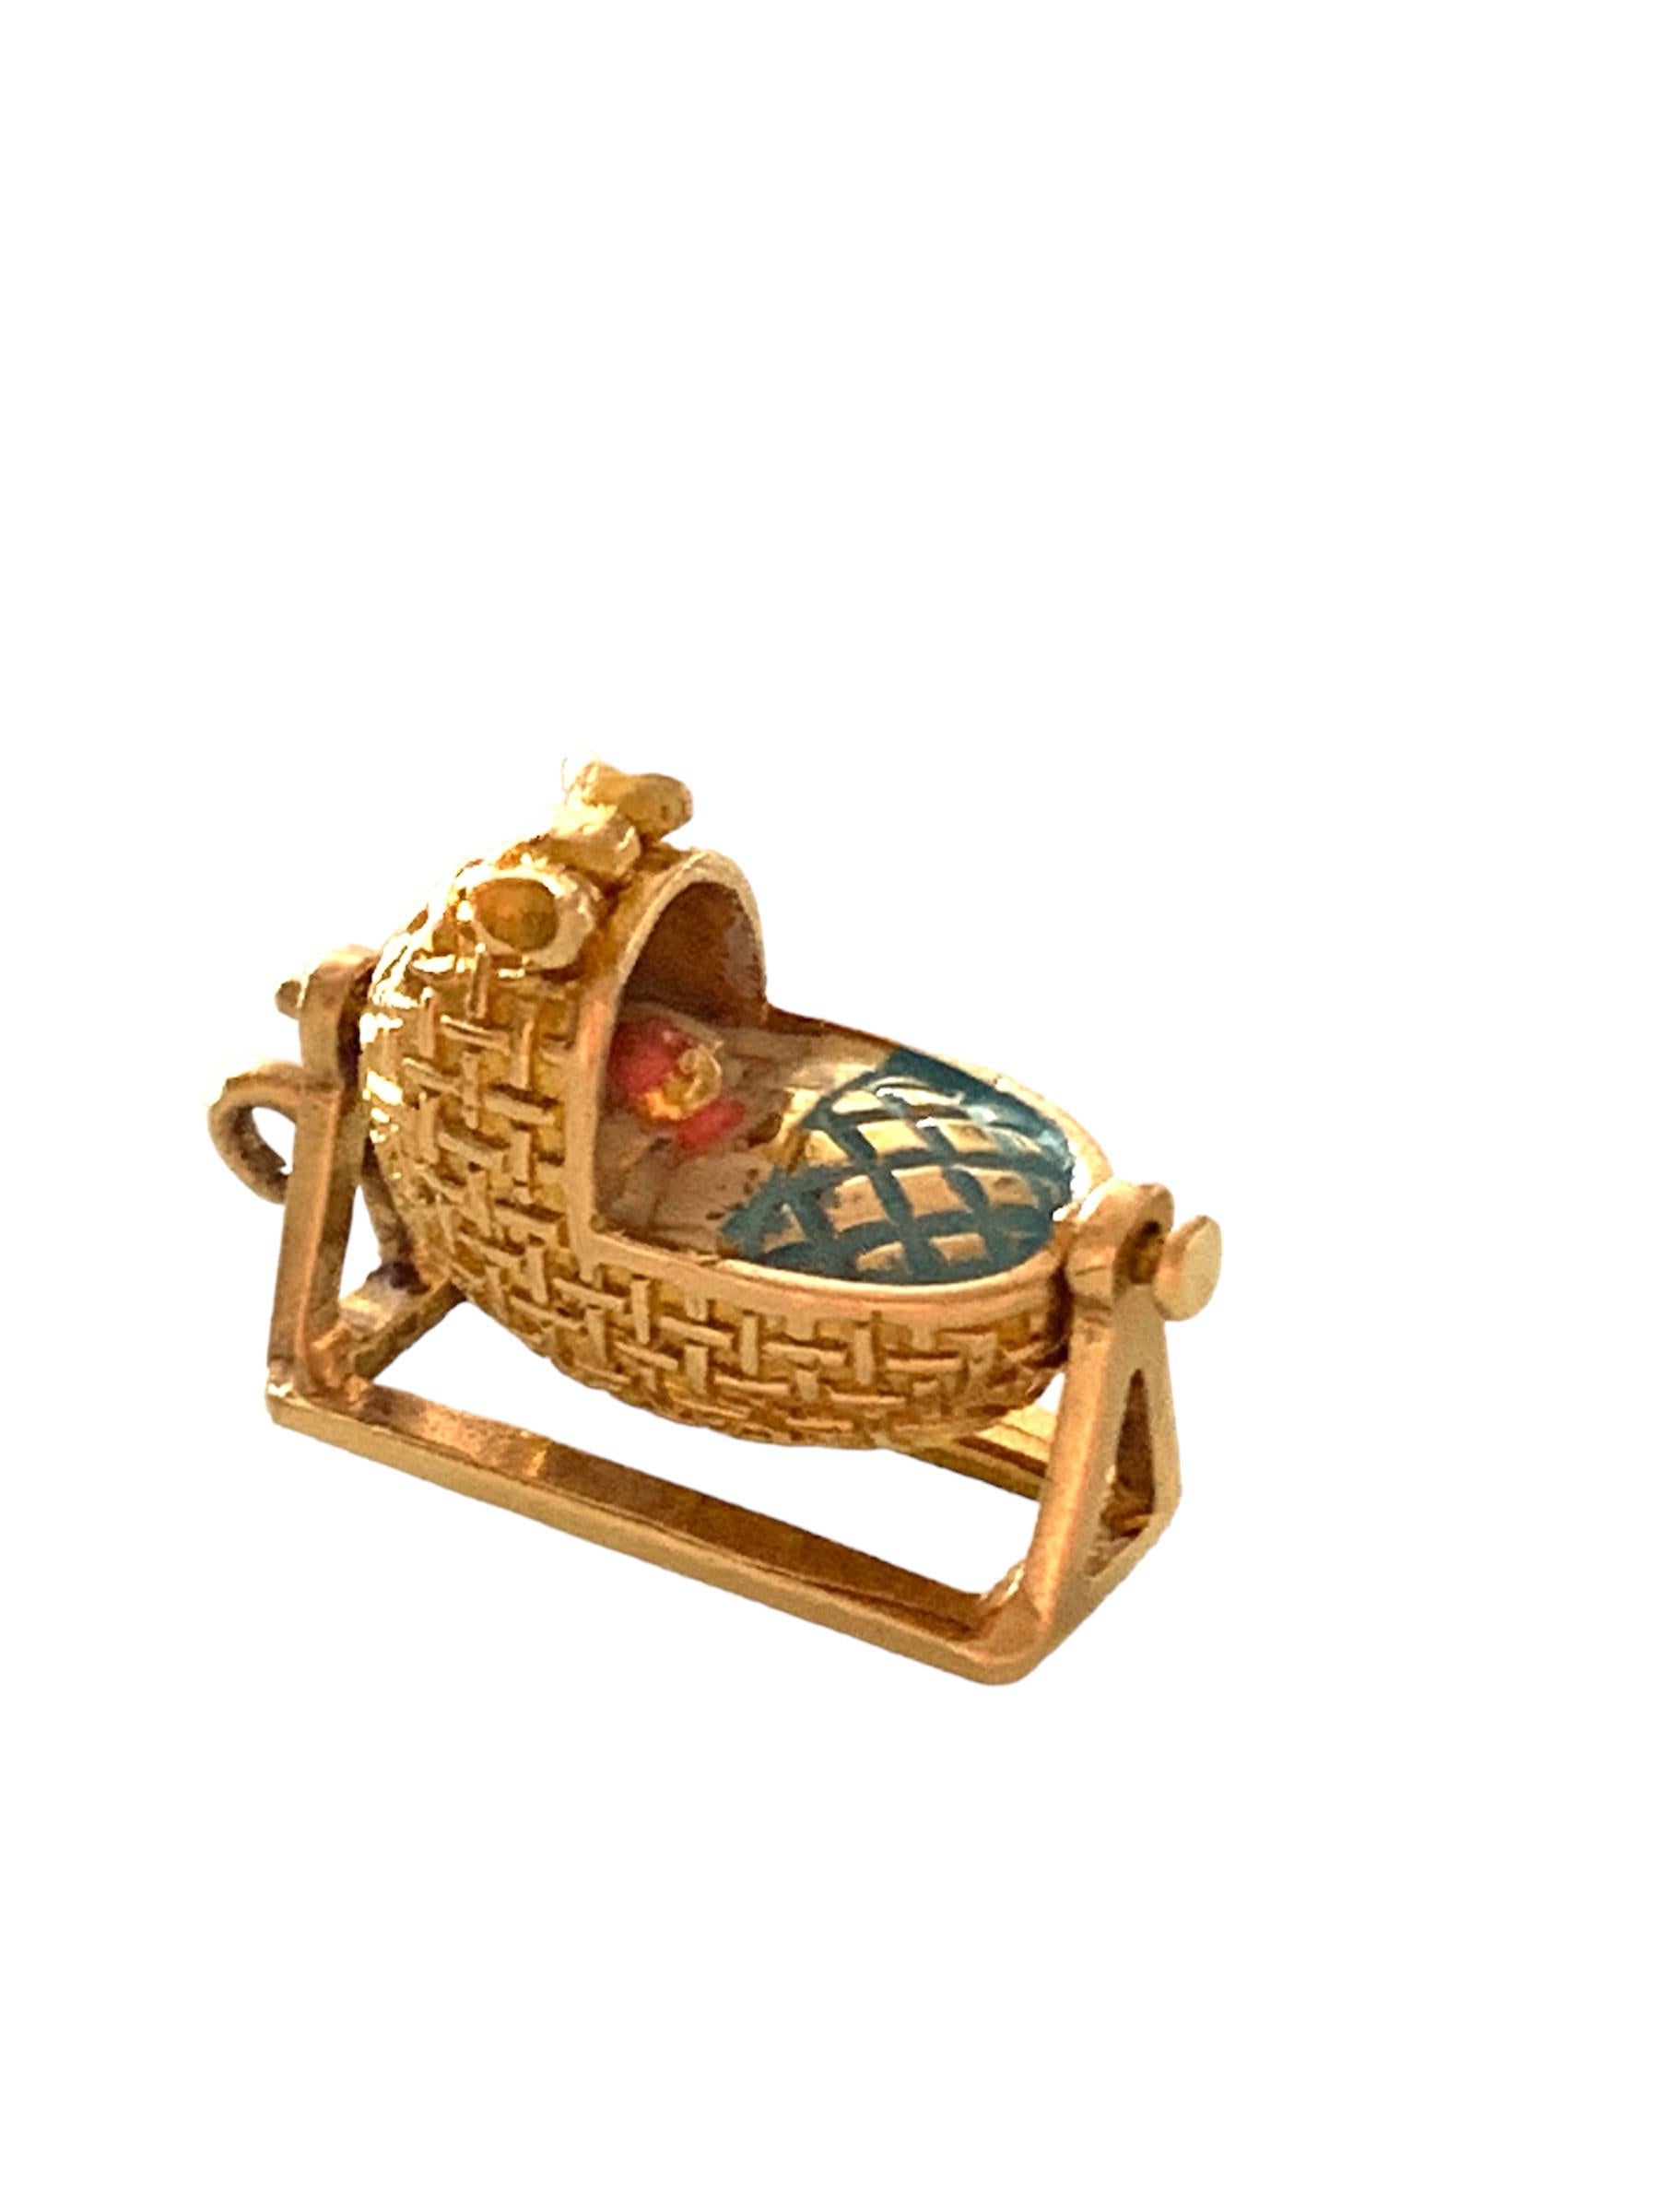 gold cradle for baby